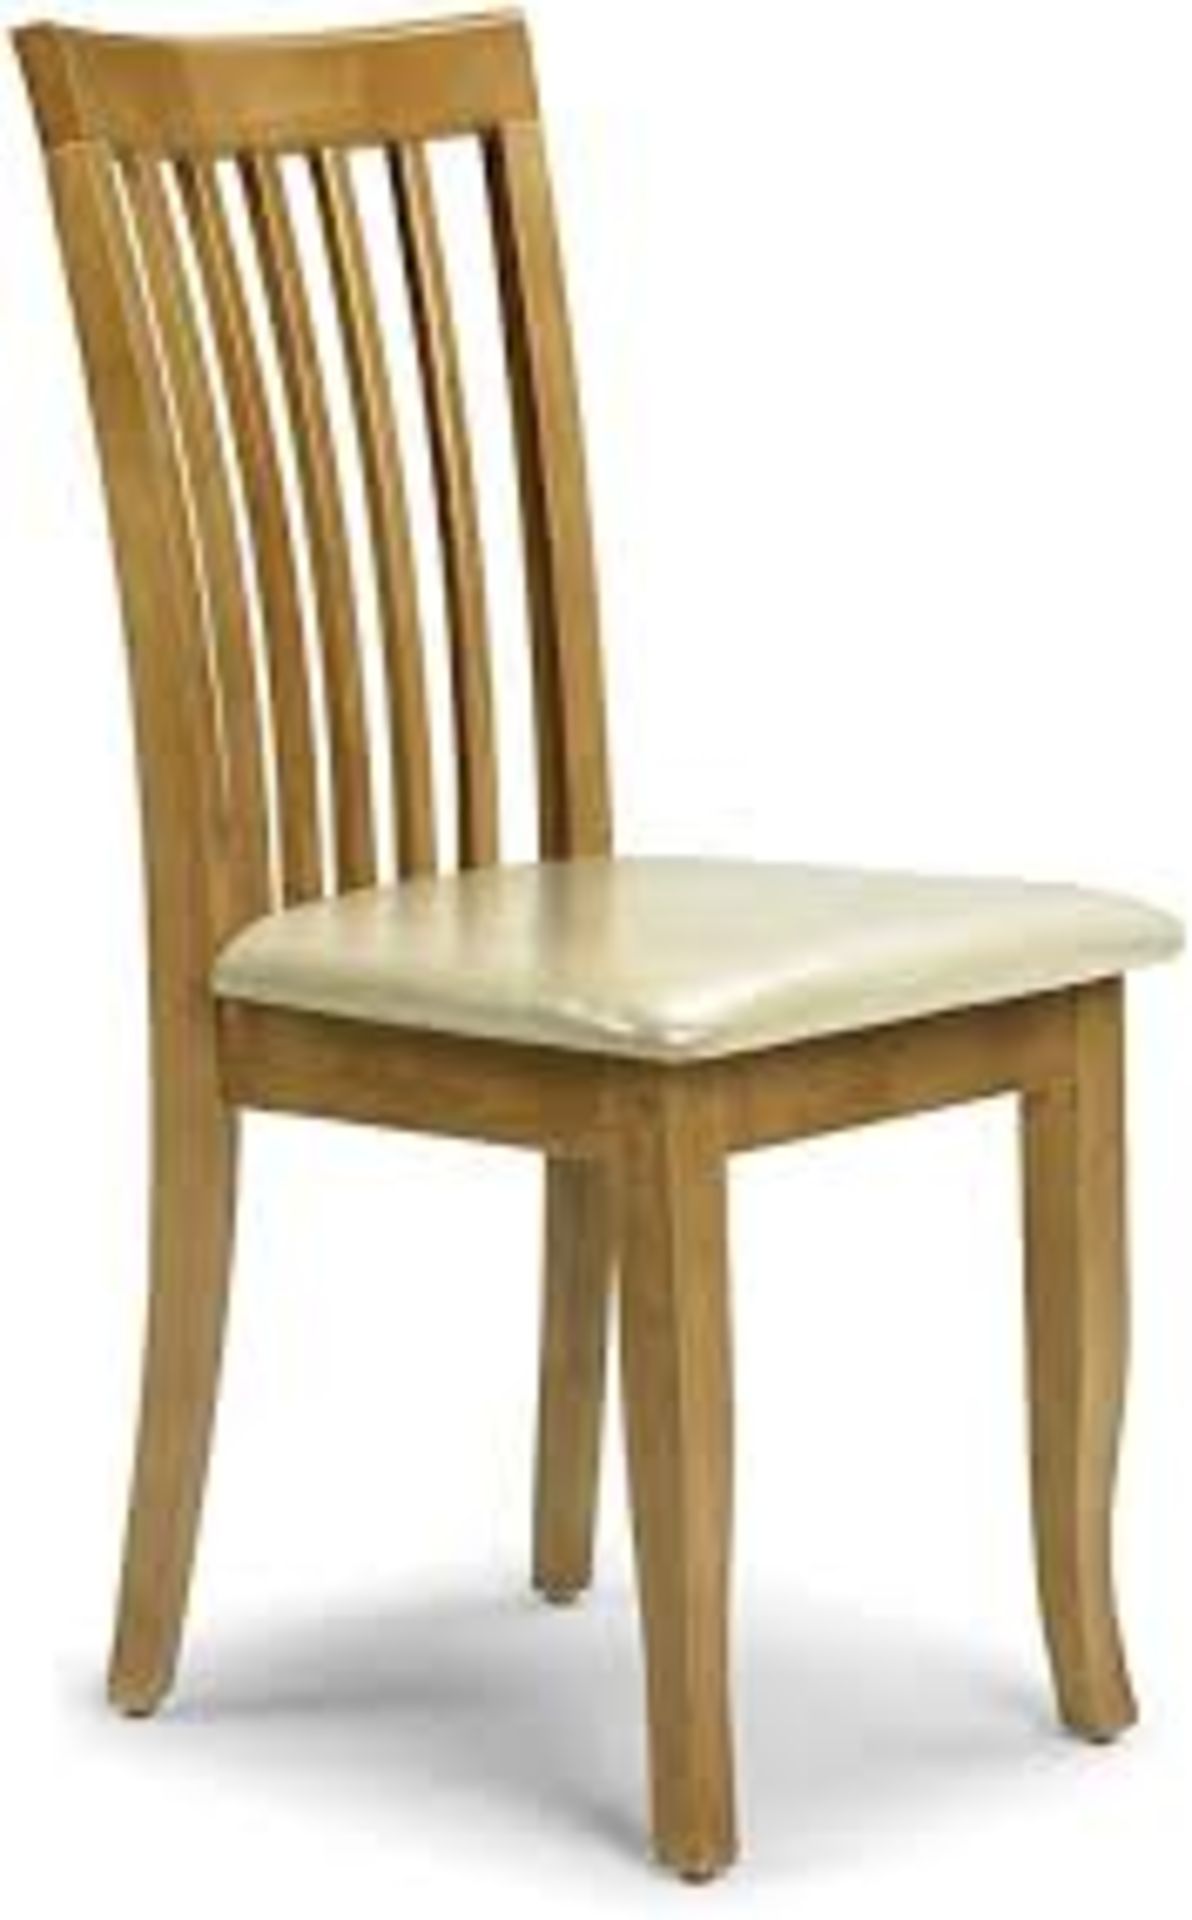 Boxed Set Of 2 Newbury Navy Solid Wooden Dining Chairs RRP £120 (18244) (Pictures Are For